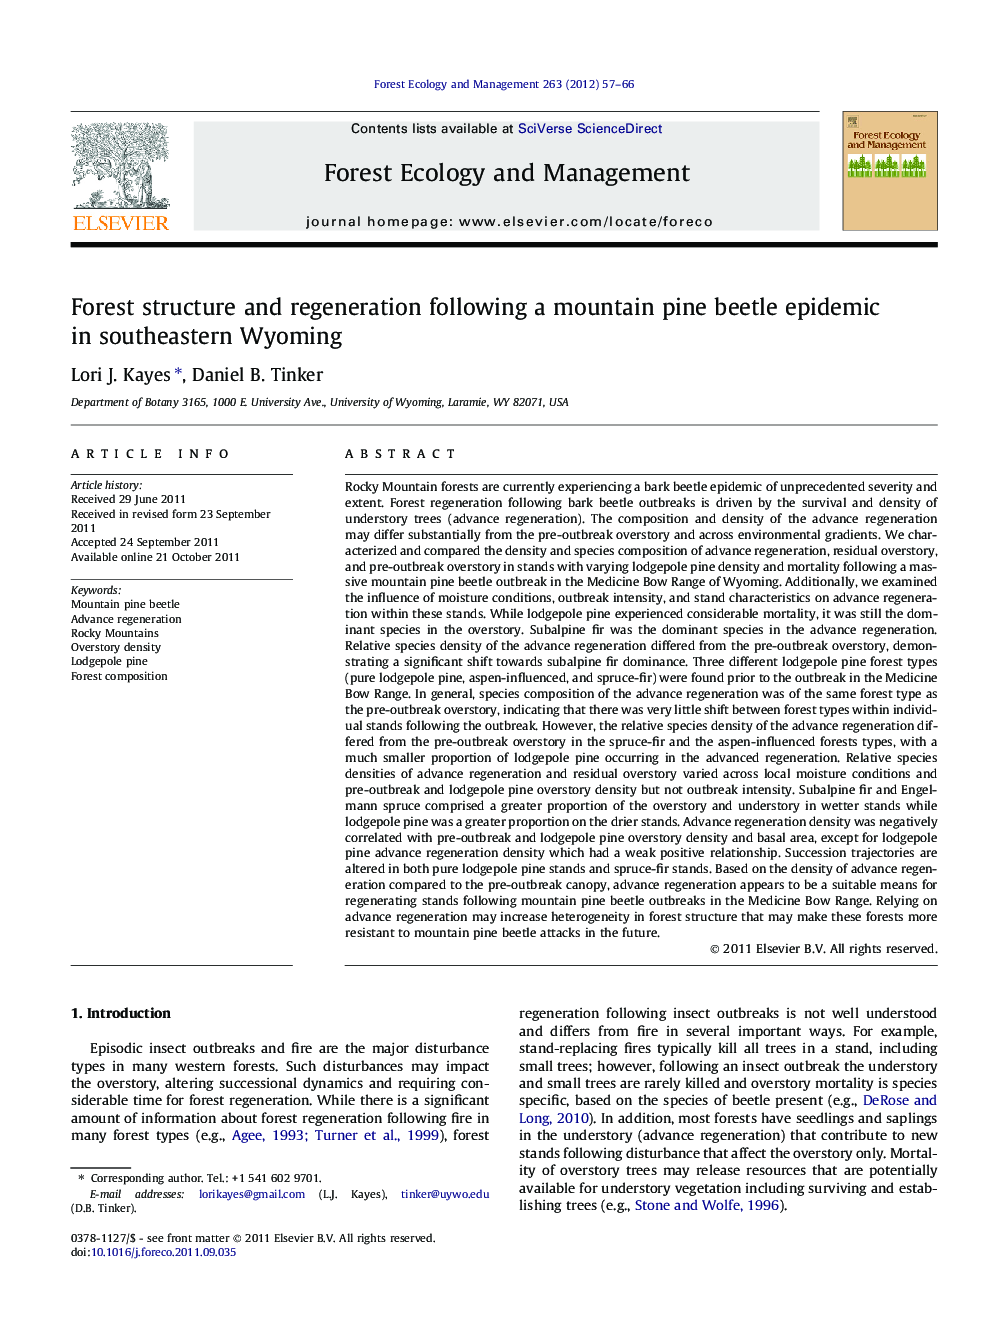 Forest structure and regeneration following a mountain pine beetle epidemic in southeastern Wyoming